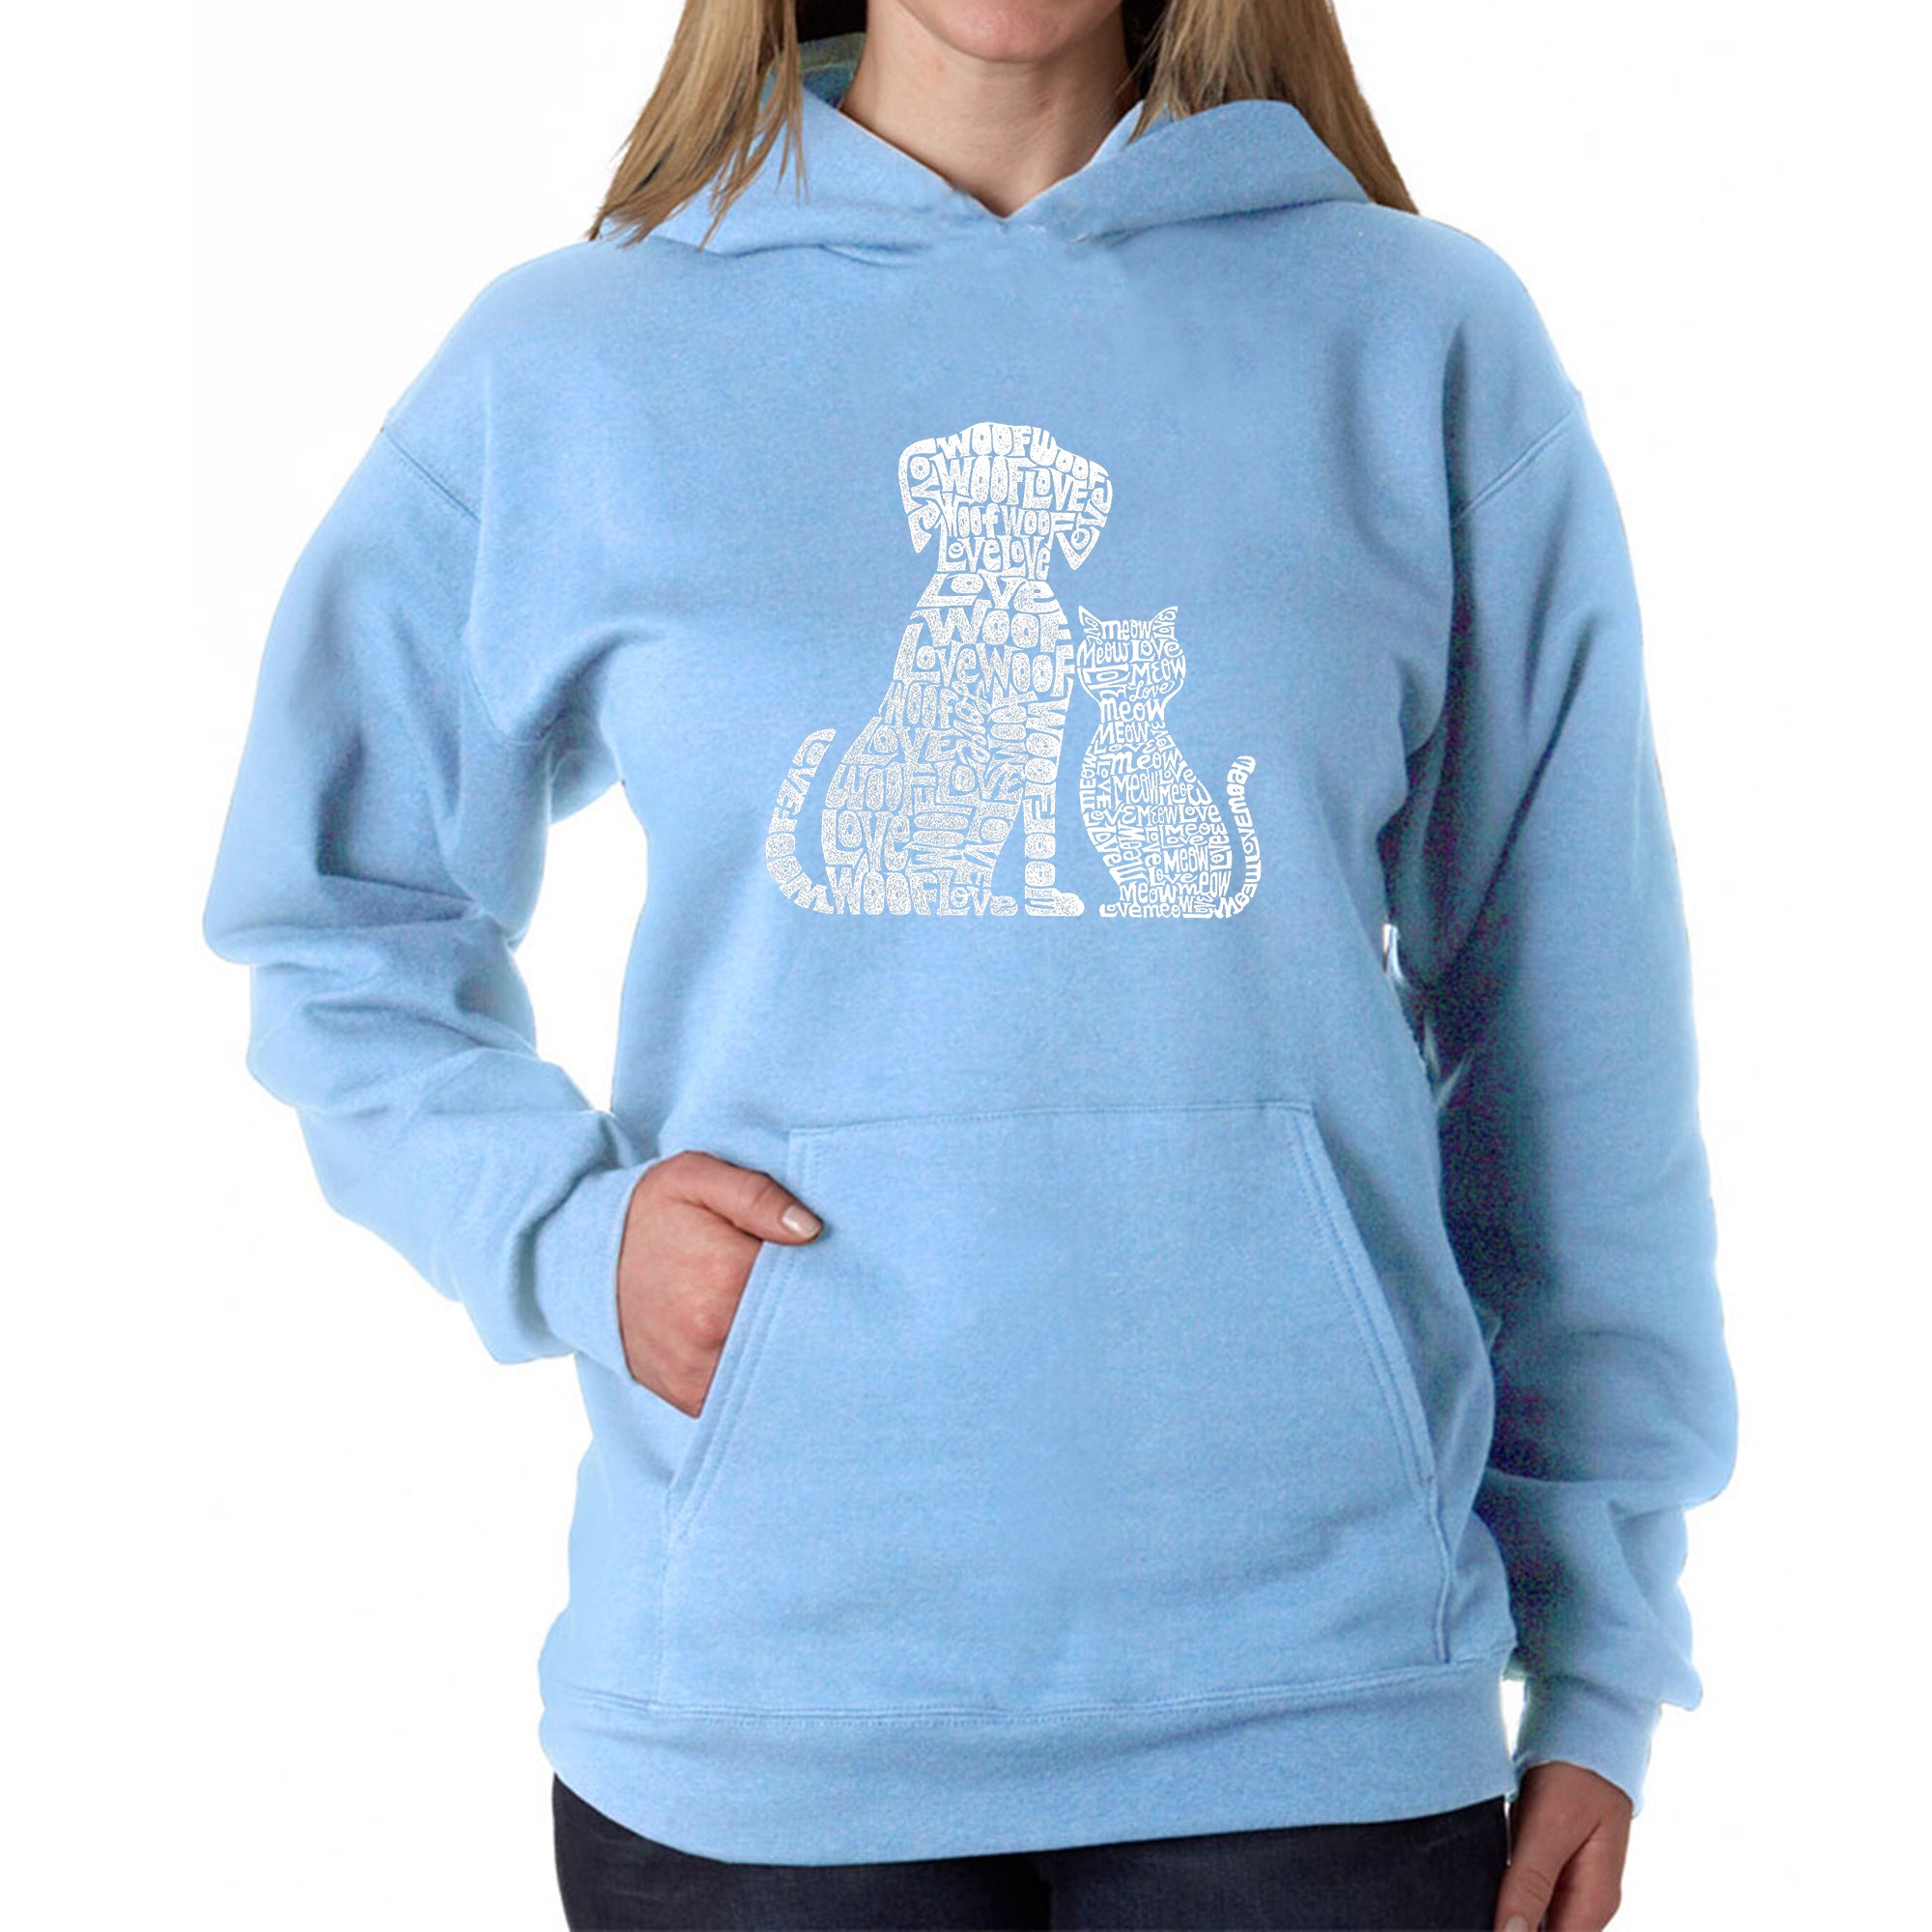 Dogs And Cats - Women's Word Art Hooded Sweatshirt - Blue - XXX-Large